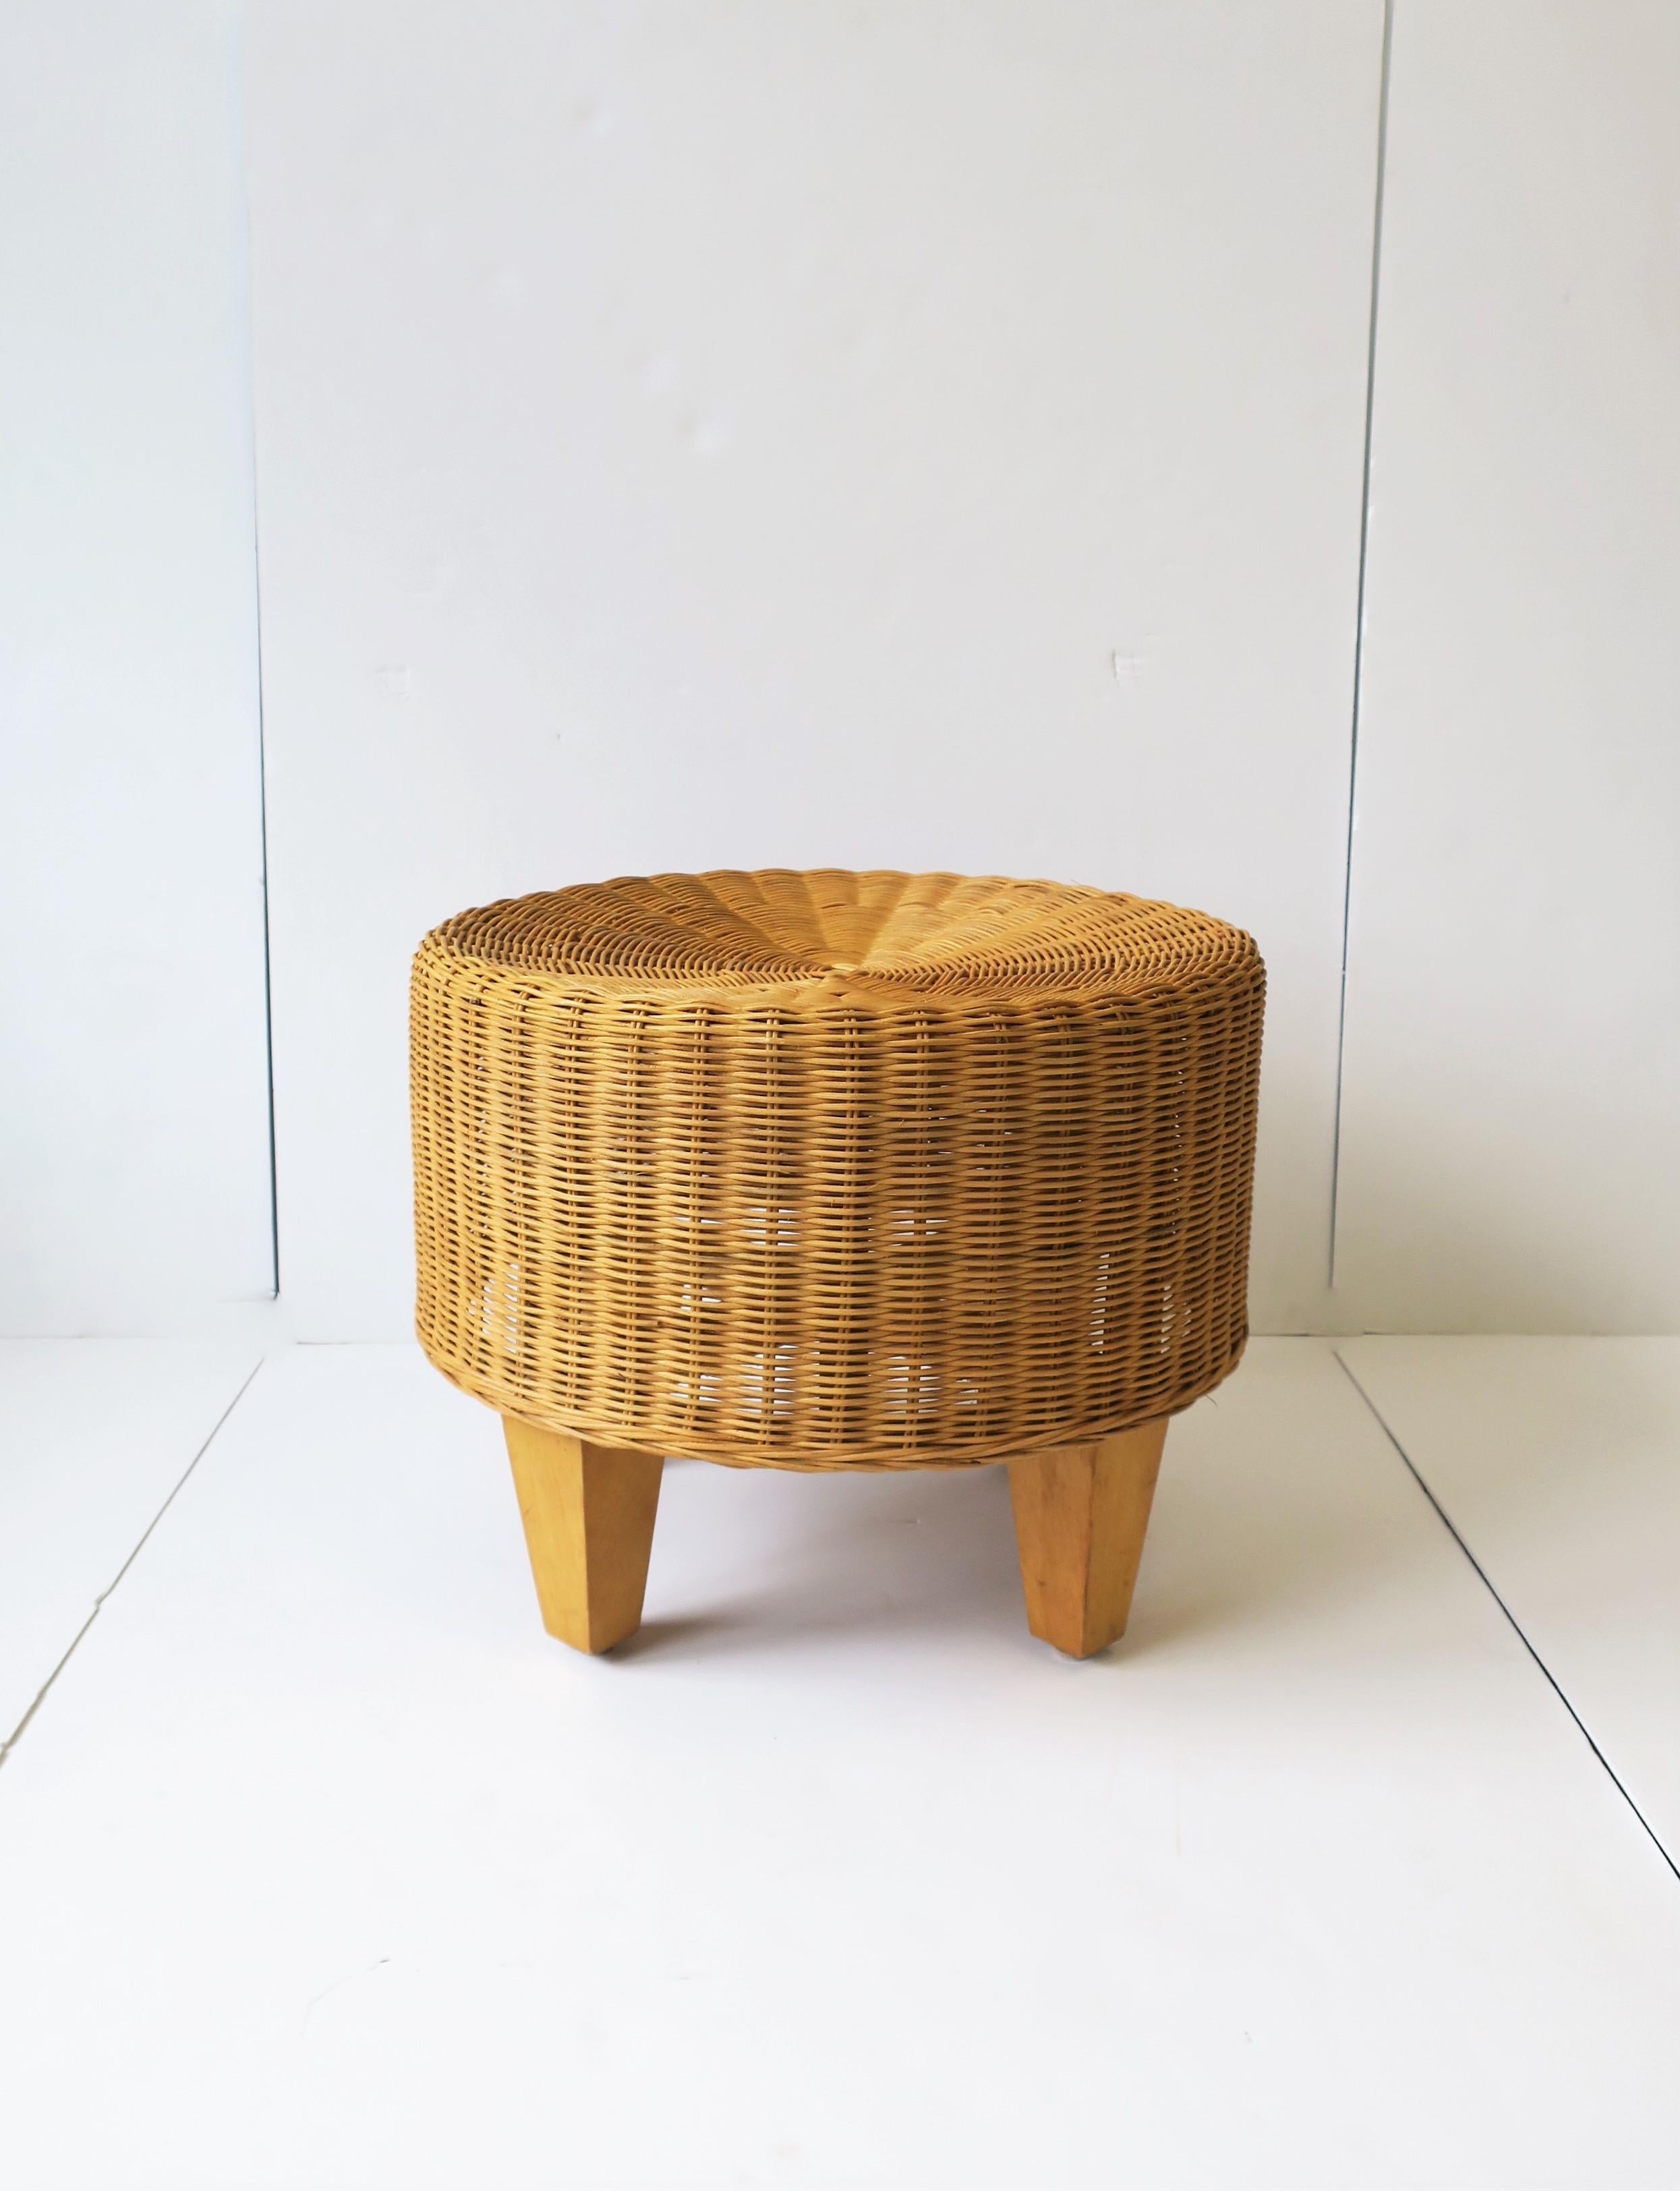 A round wicker stool or ottoman with tri-pod wood legs. Piece could also work as a side/drinks table providing there's a stable environment on top (e.g. coffee table book, as demonstrated.) Piece measures: 19